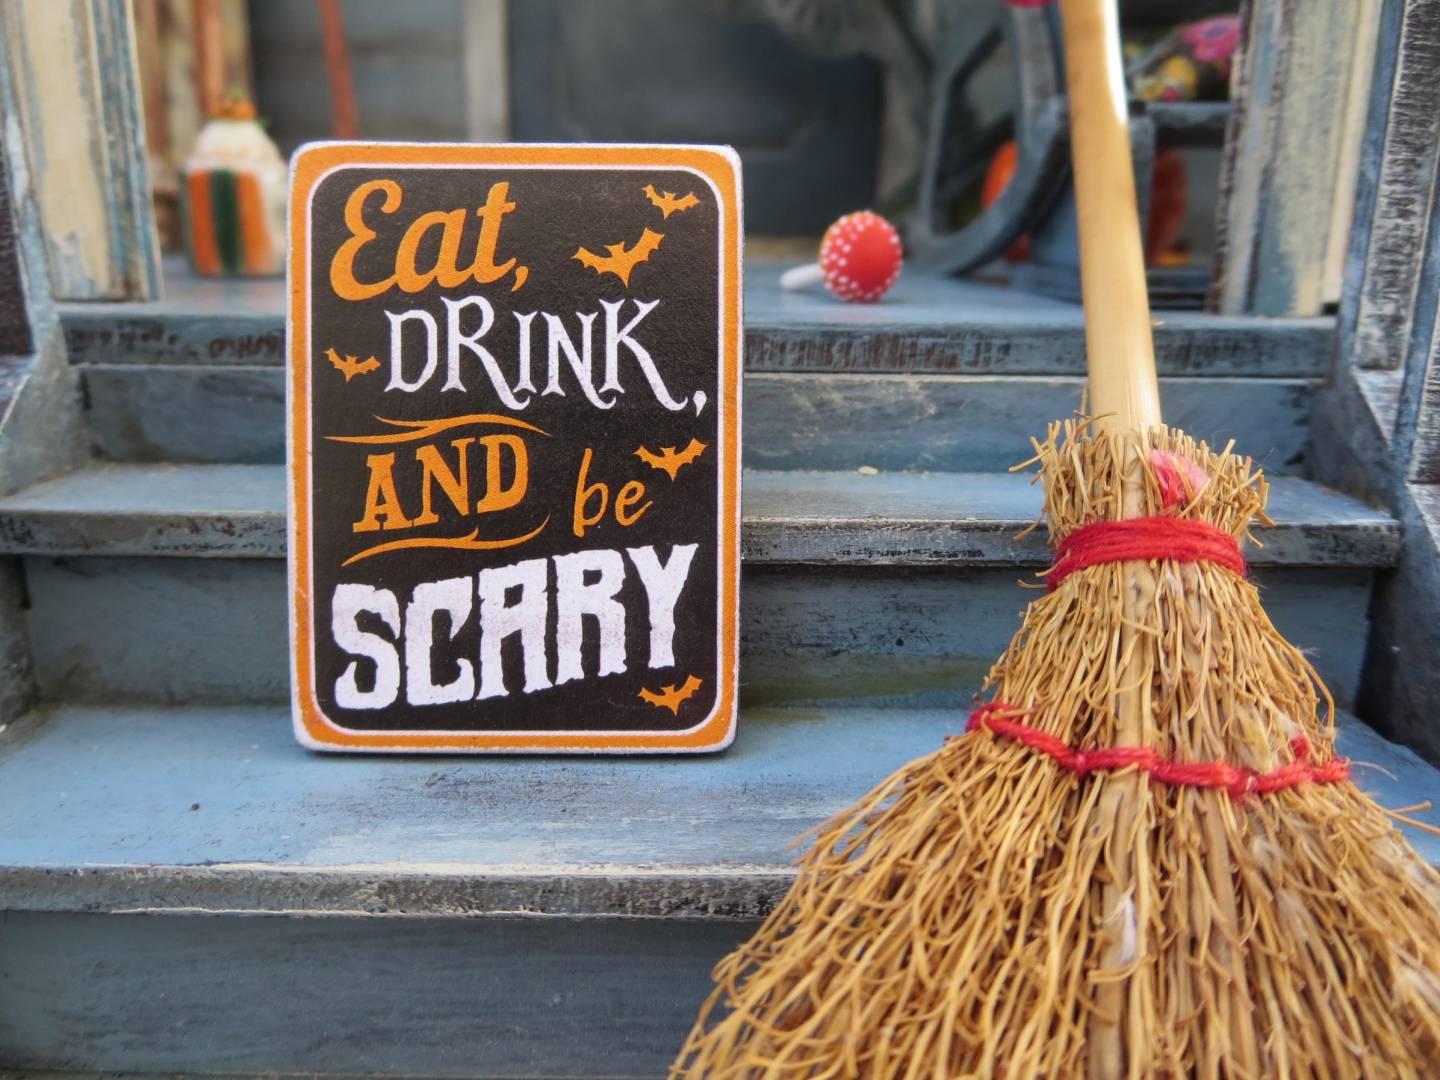 photo of a sign that says "eat drink and be scary" on front porch steps next to a broom, should christians celebrate halloween